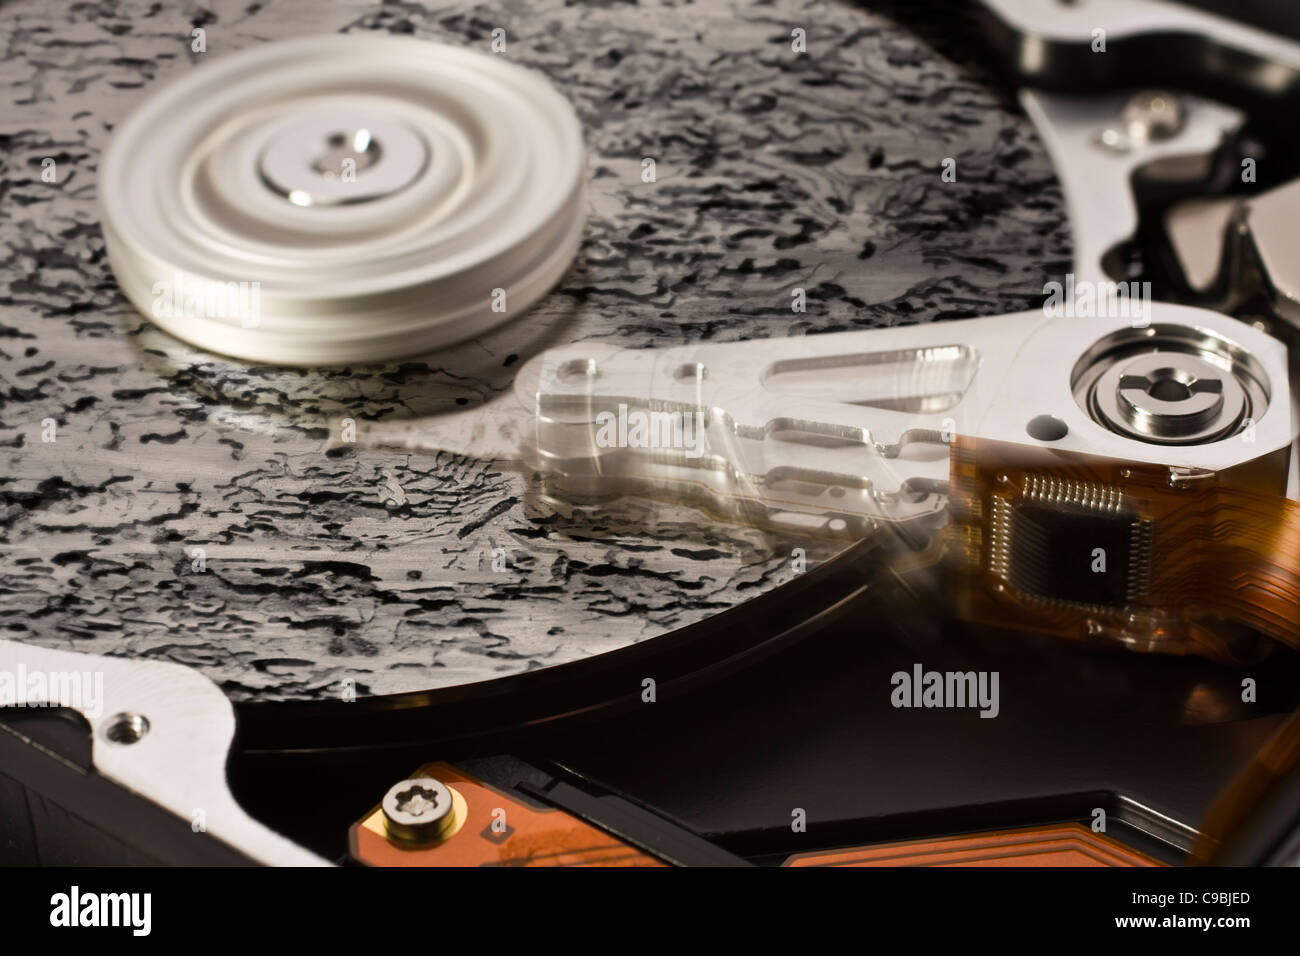 symbolic data loss theme showing a open hard disk with symbolic rotten data Stock Photo